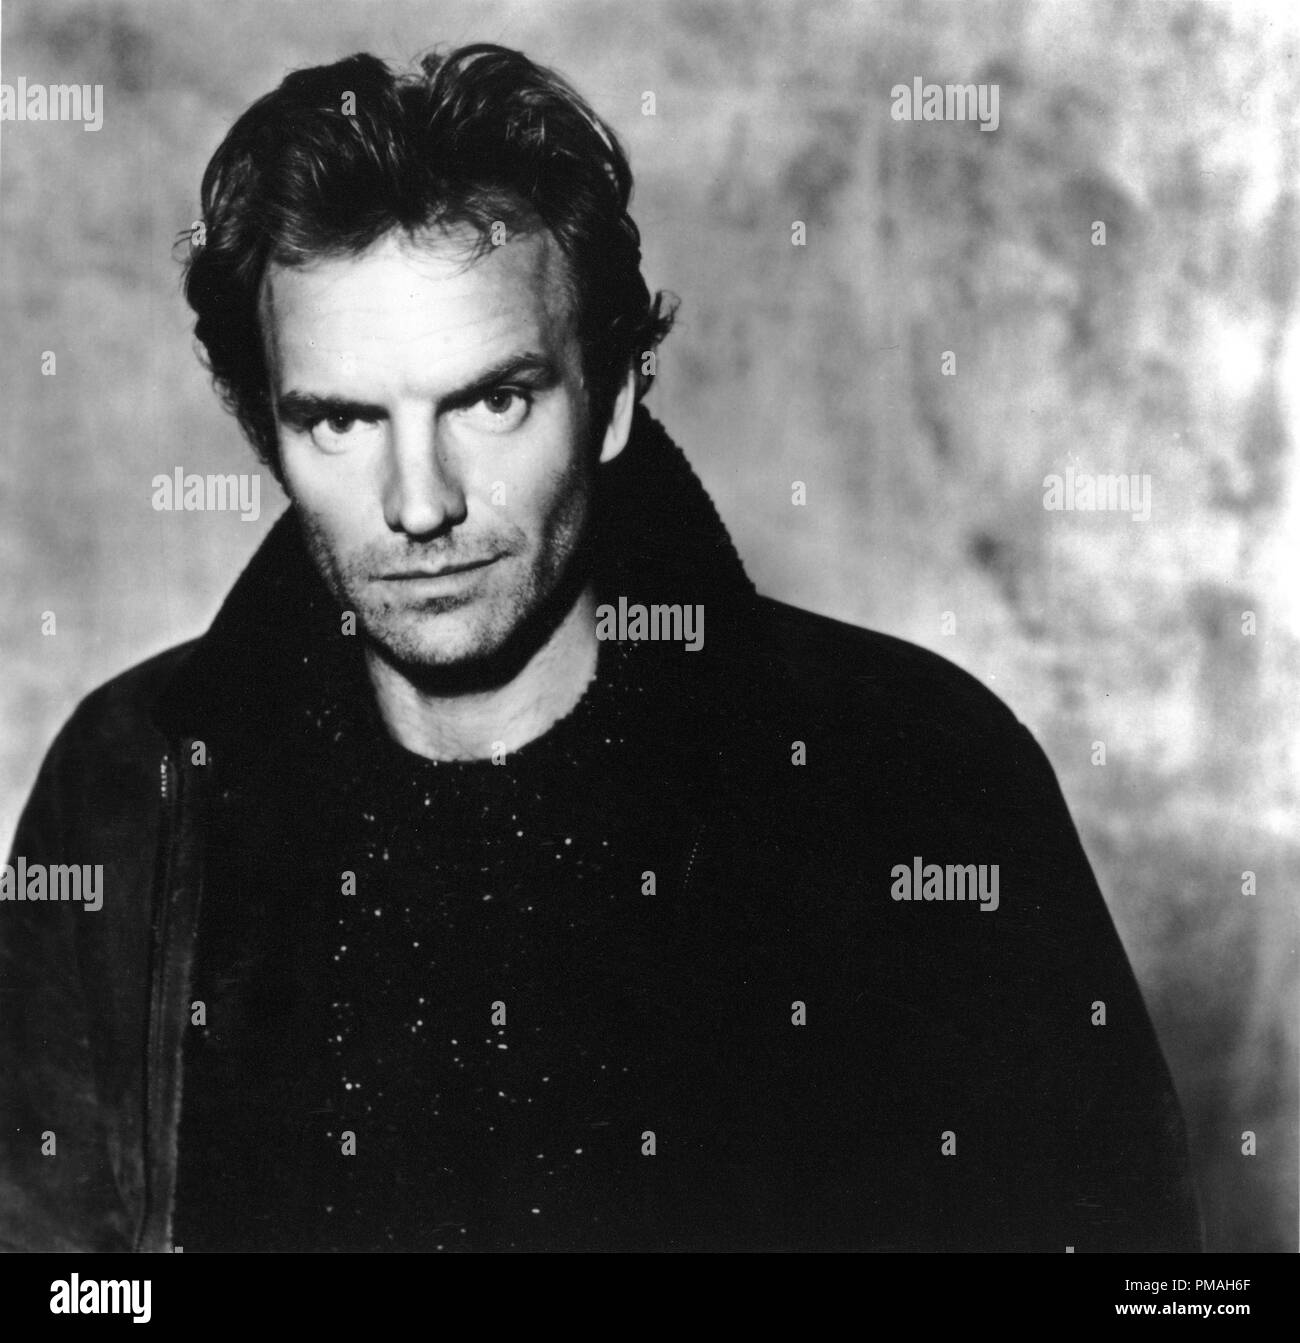 Publicity photo of Sting, circa 1991  File Reference # 32733 474THA Stock Photo